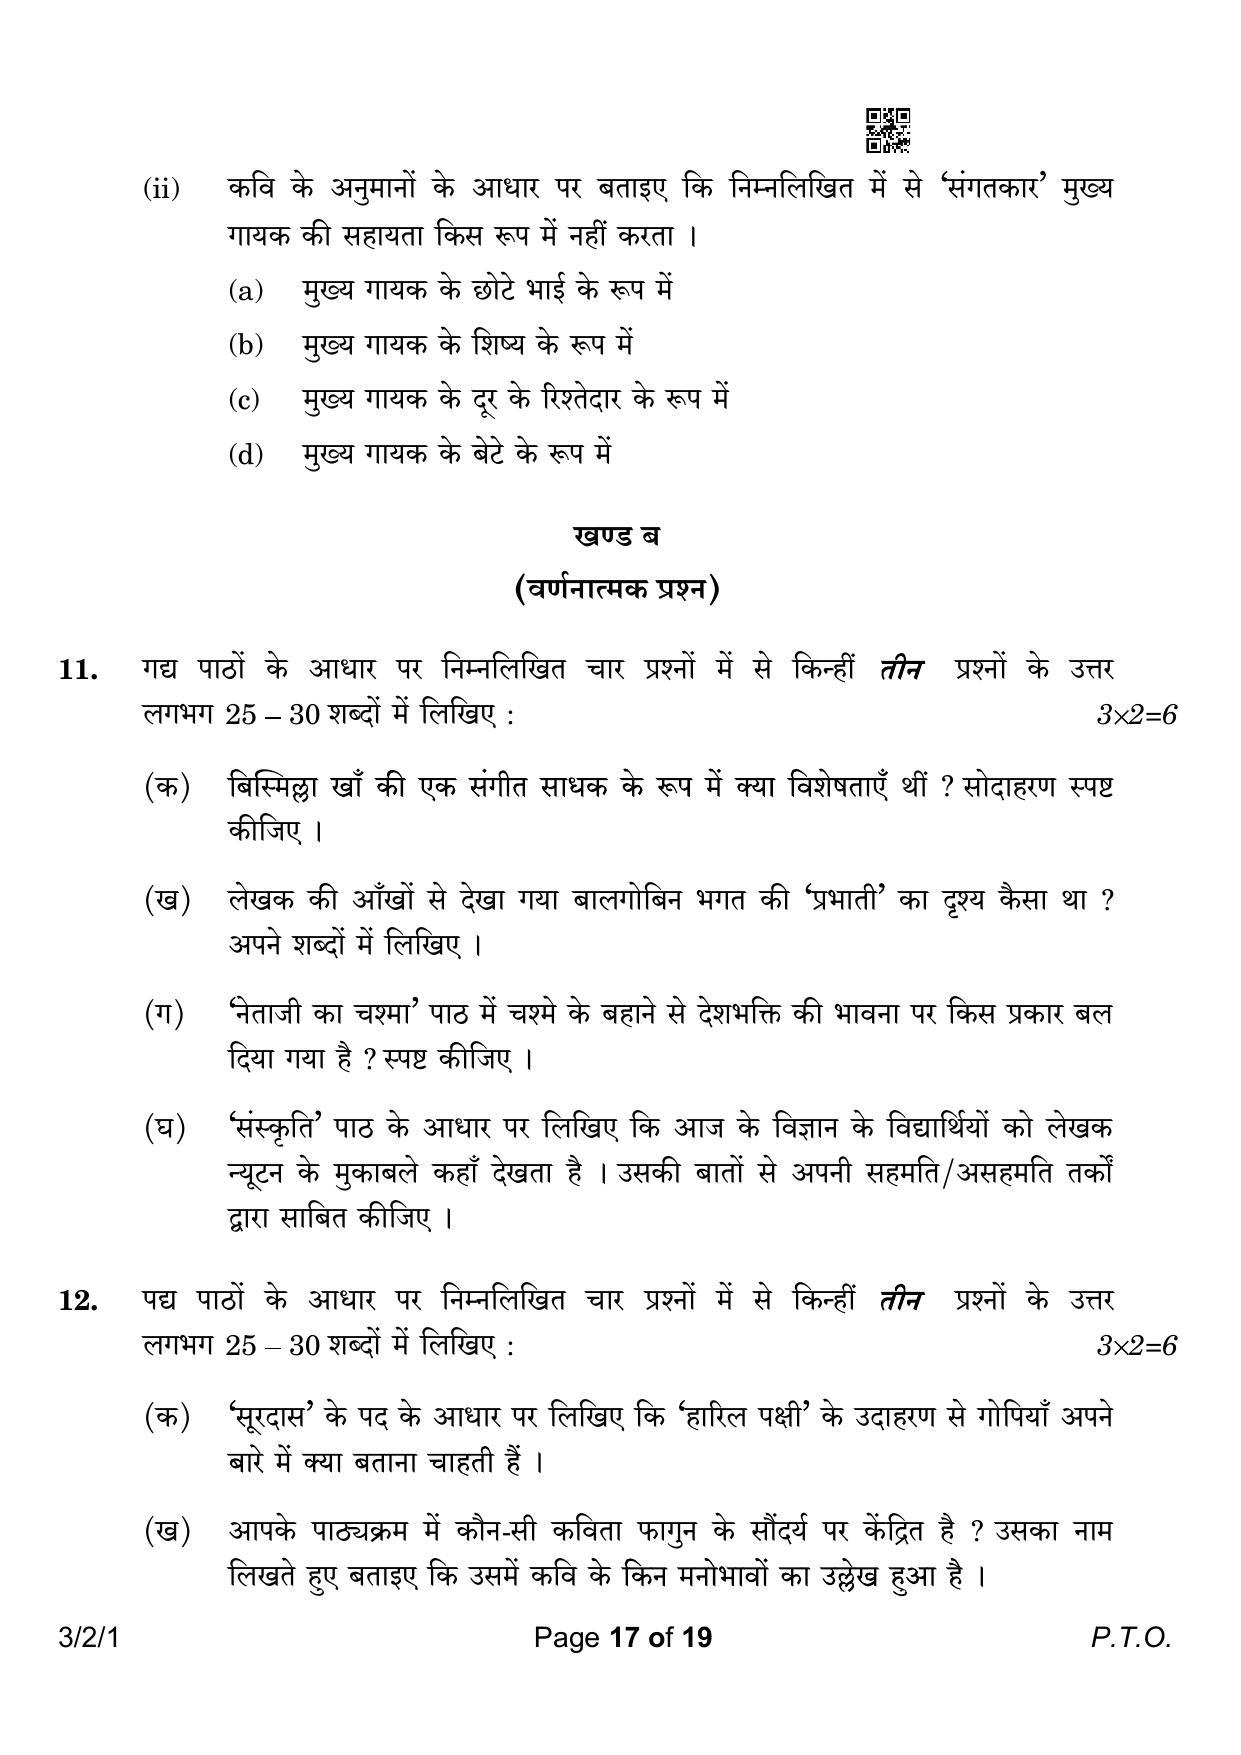 CBSE Class 10 3-2-1 Hindi A 2023 Question Paper - Page 17